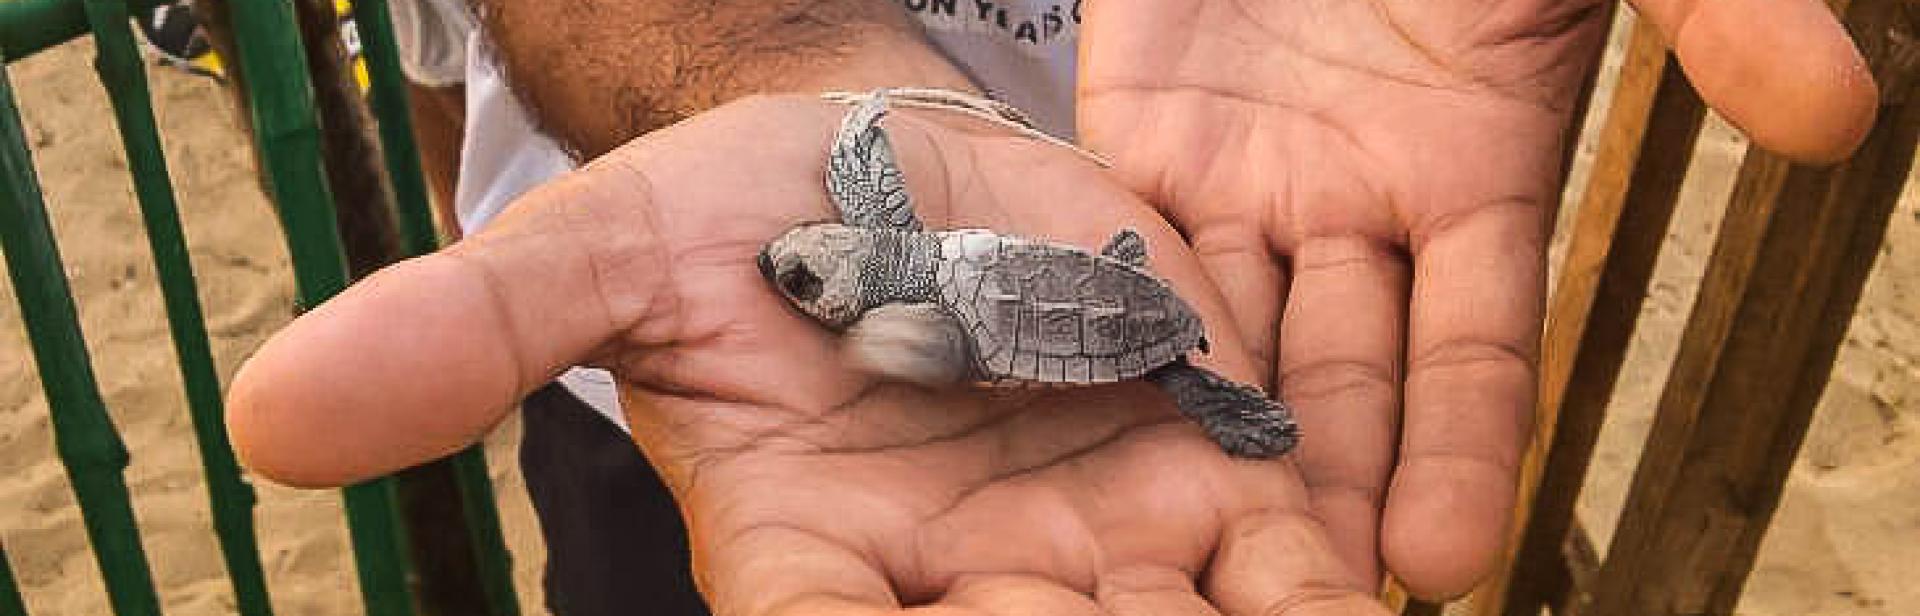 CCMP Fellow’s Reporting on Vulnerable Sea Turtles in India Continues to Garner Attention